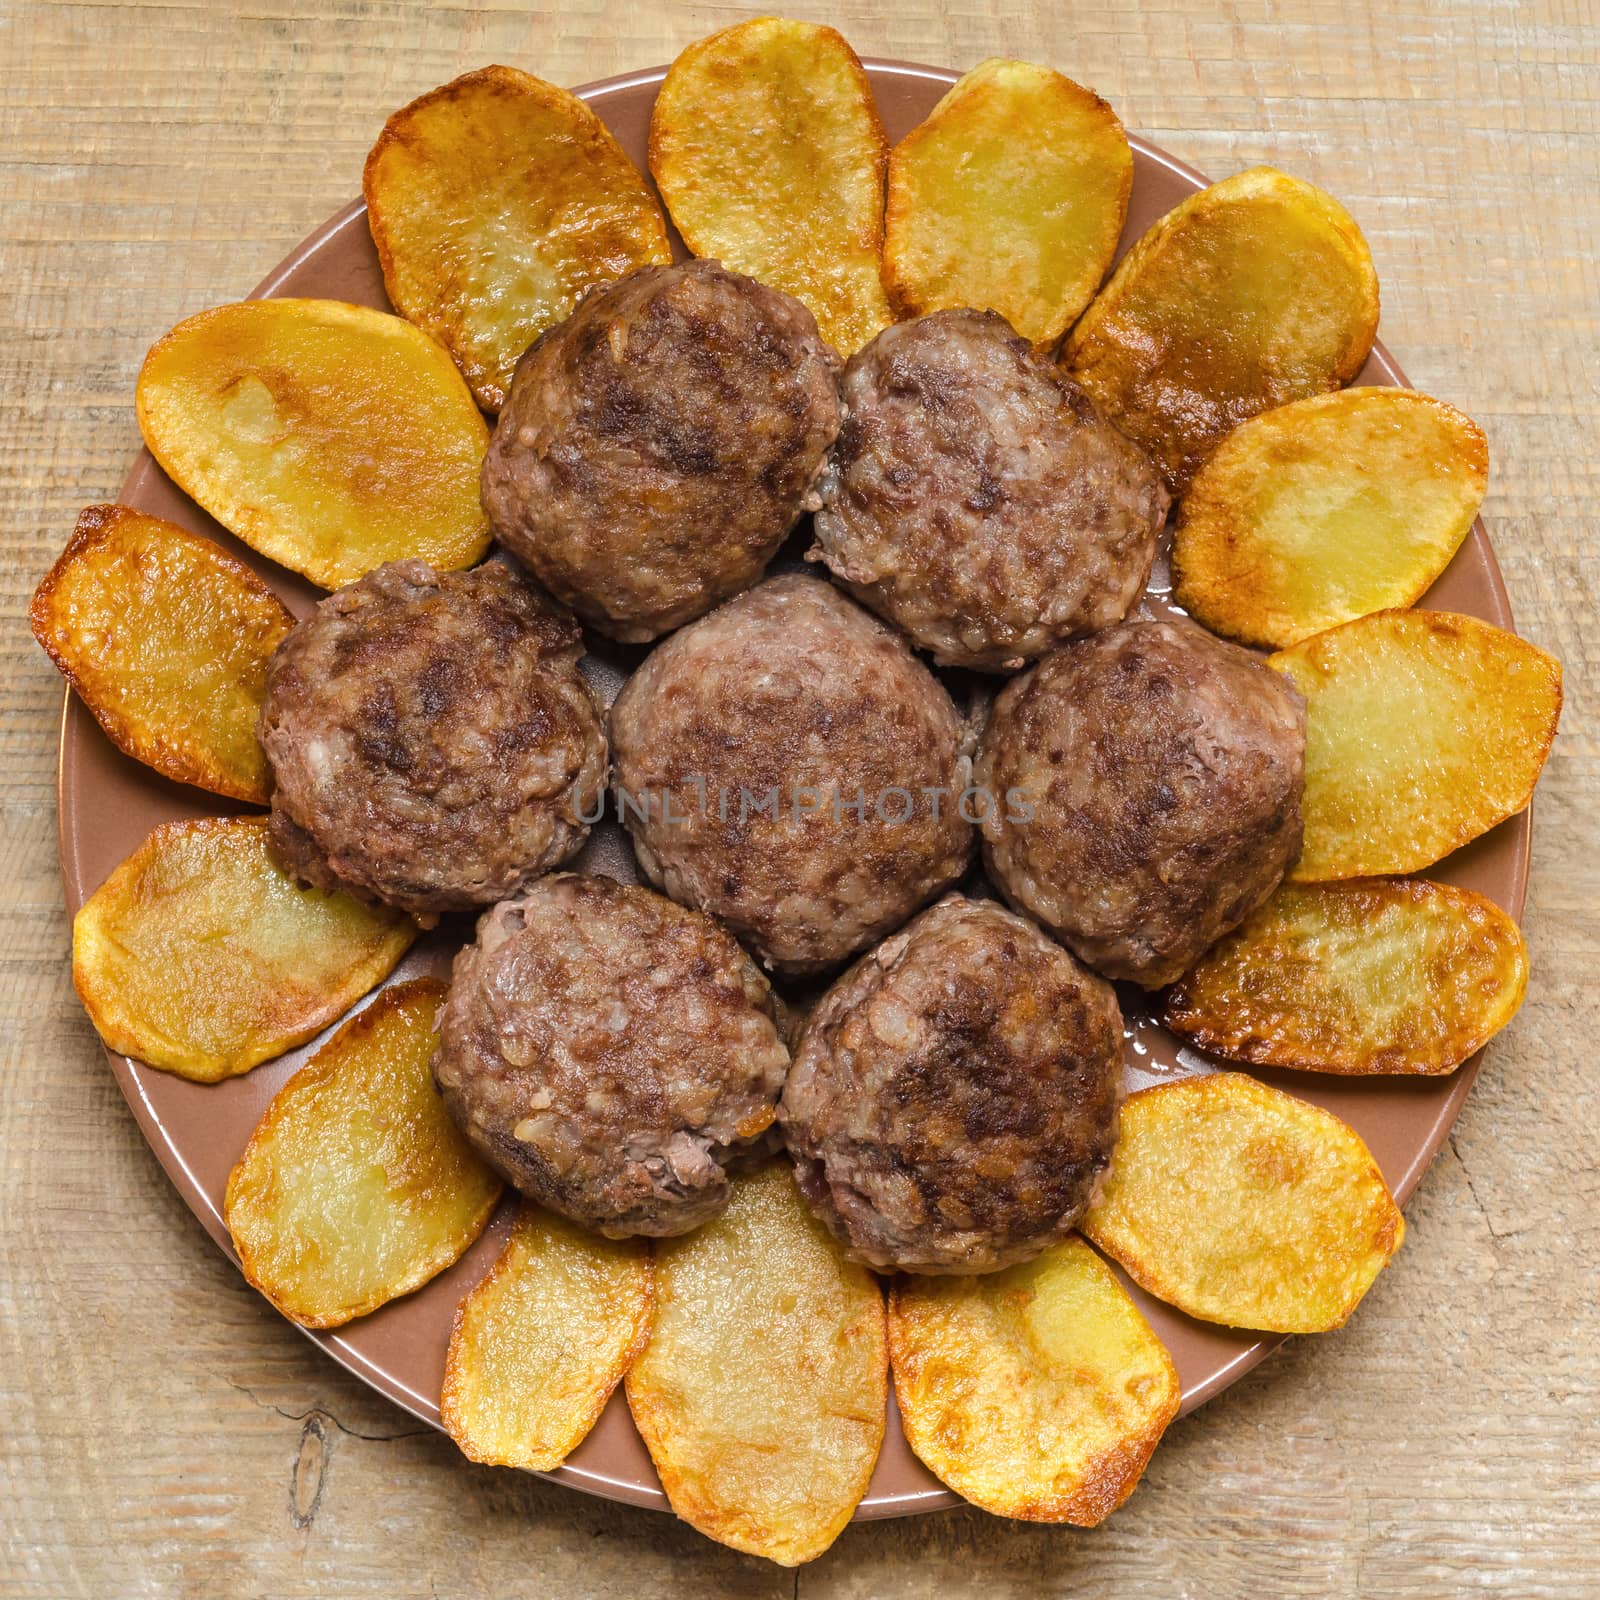 Fried meatballs with rice and French fries on the plate on wooden background.